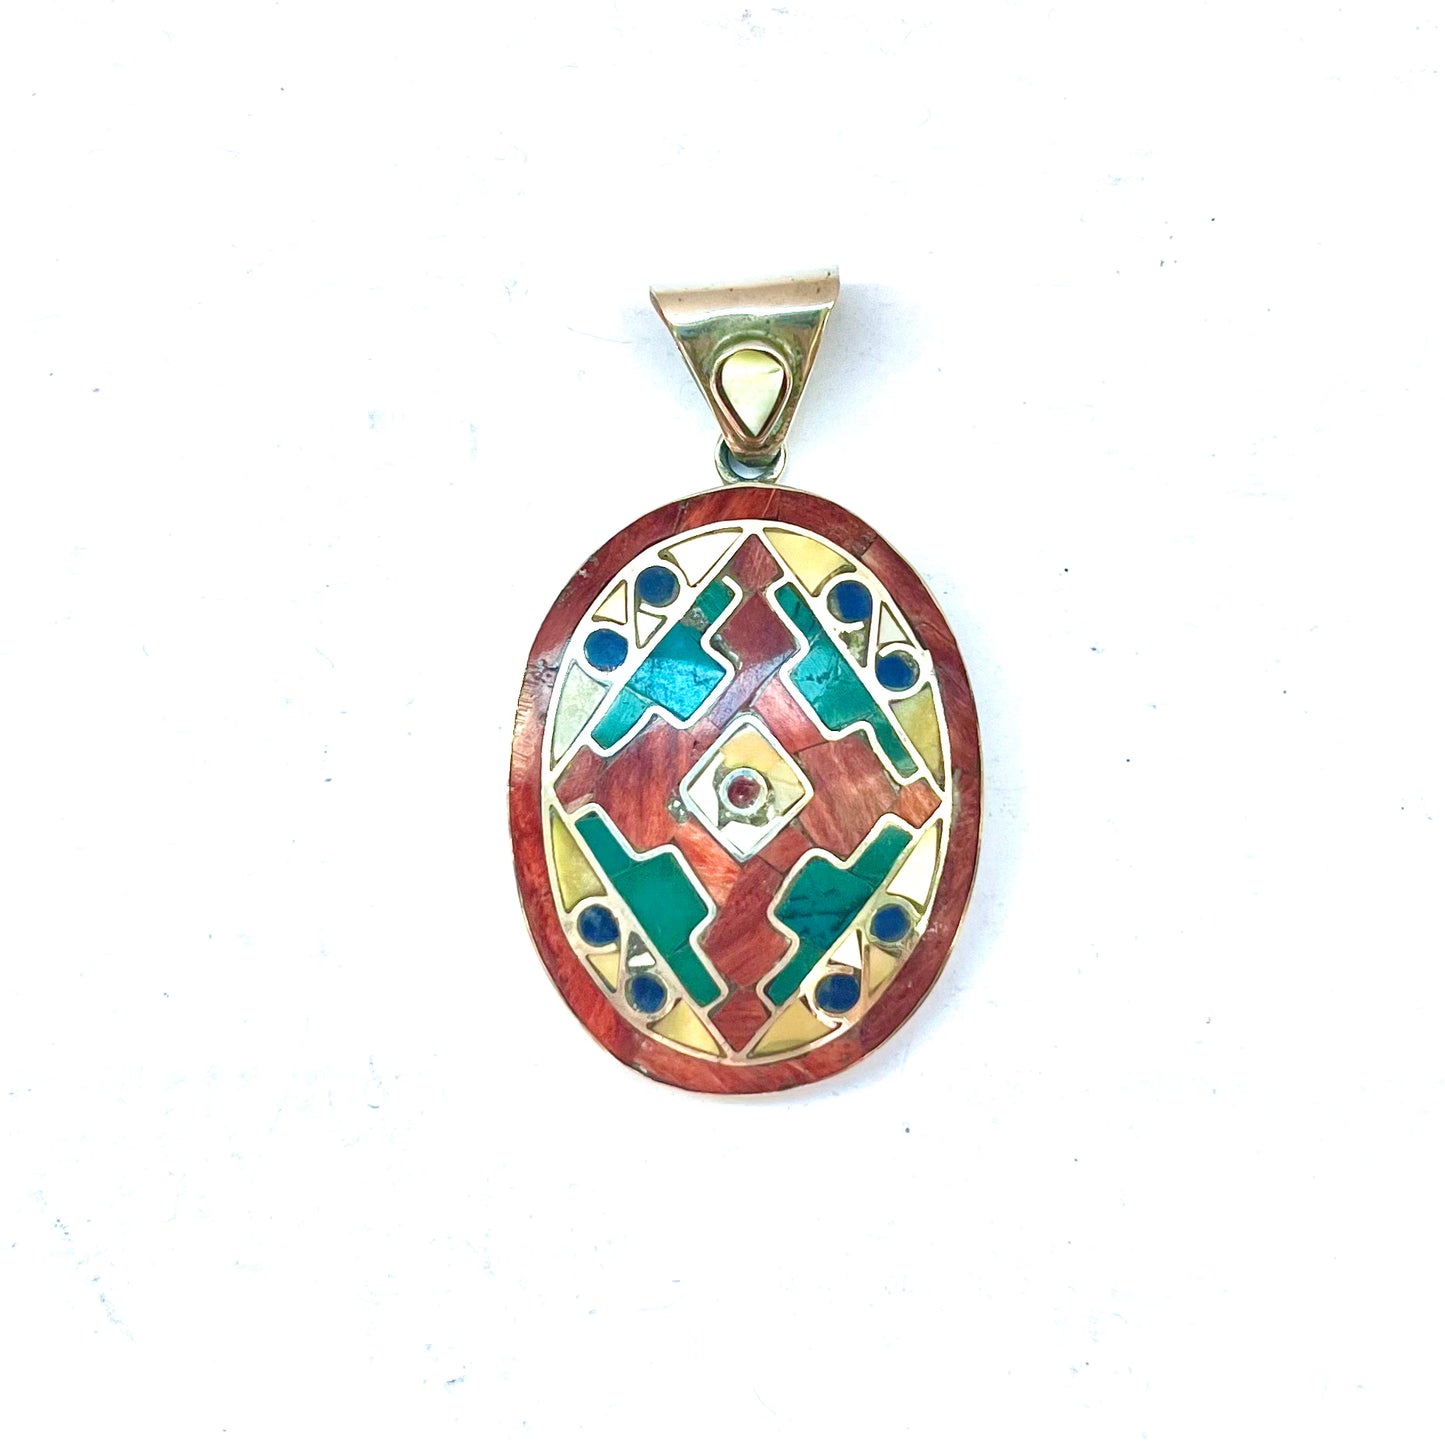 Vintage sterling silver and stone inlay pendant, Southwestern or Peruvian in style